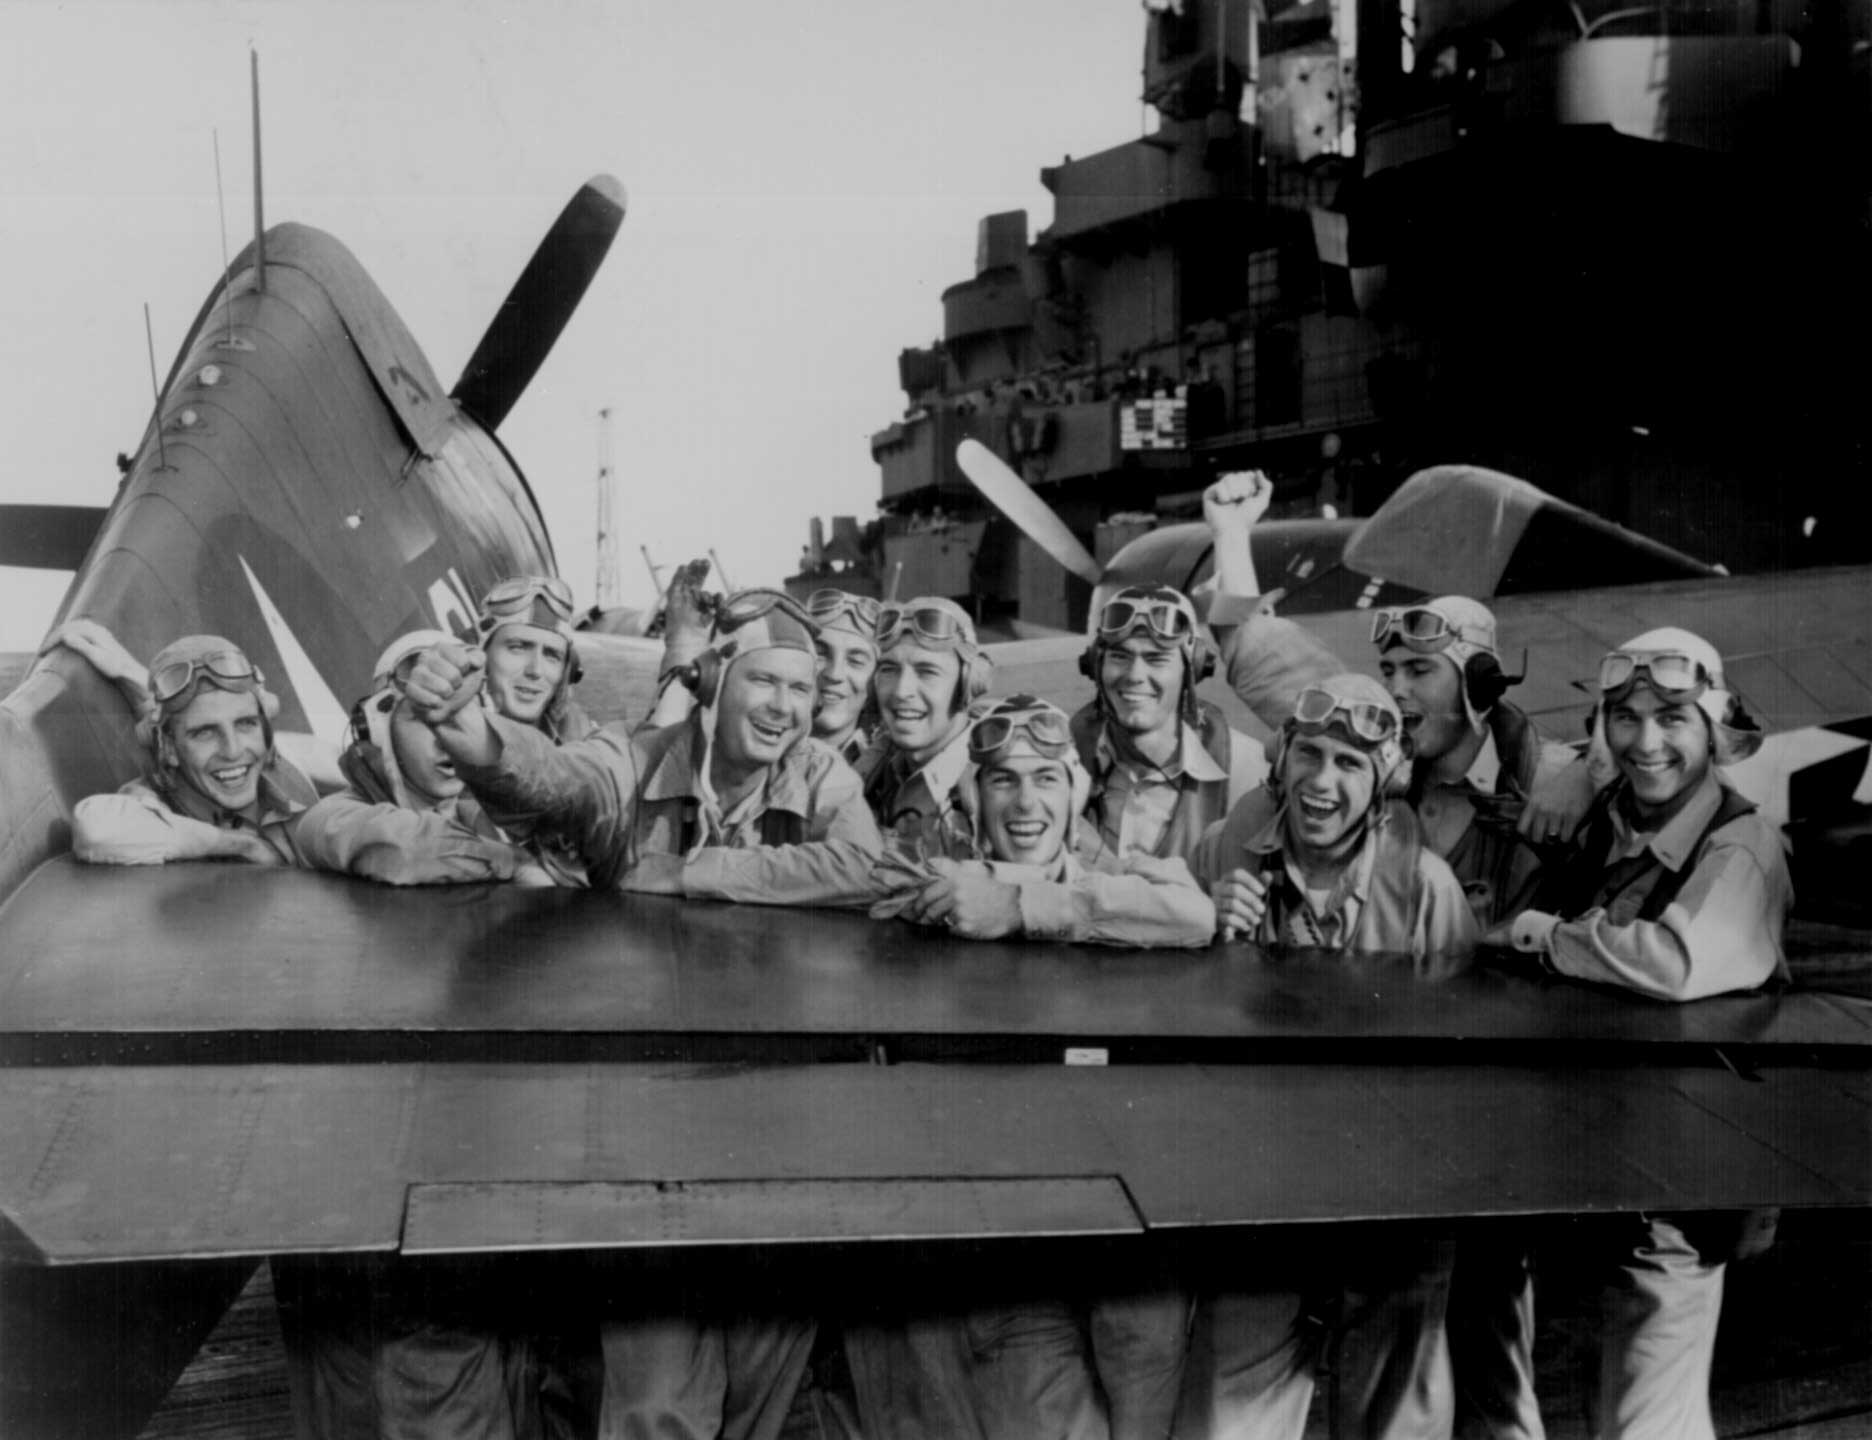 Lexington pilots celebrated a successful attack on the Marshall Islands, Nov 1943